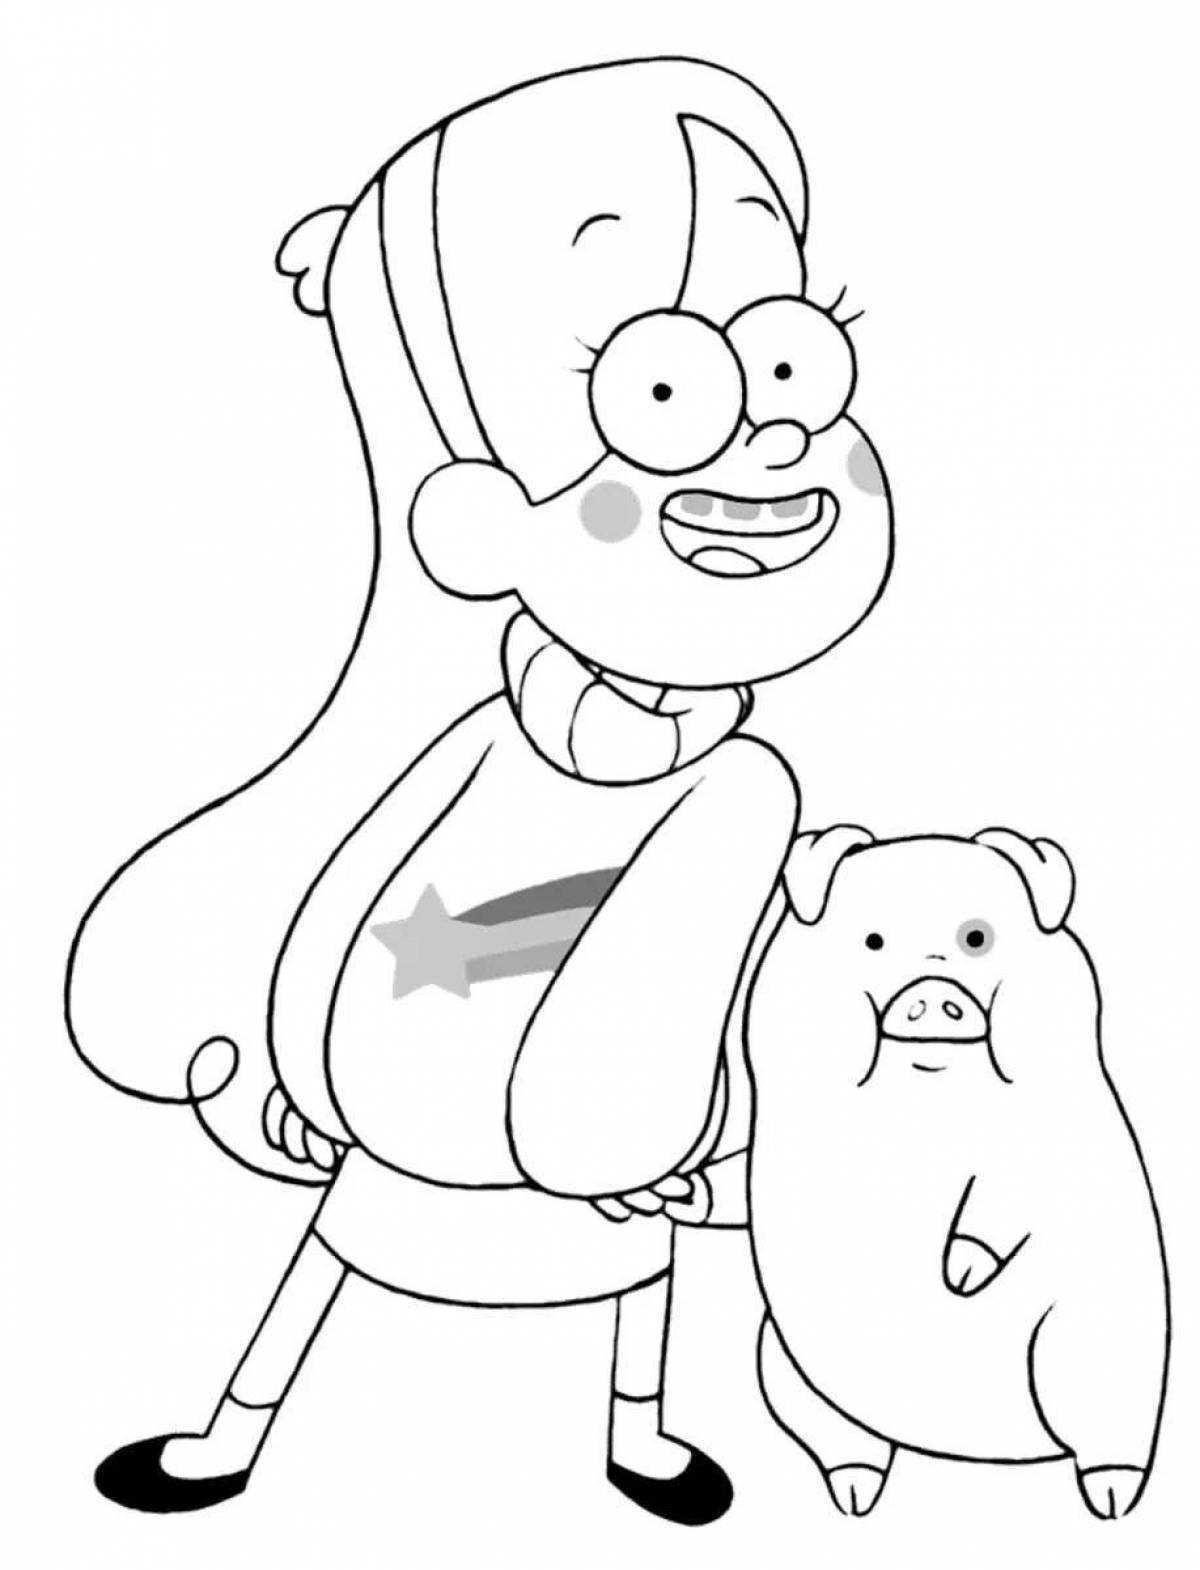 The bright couple from gravity falls